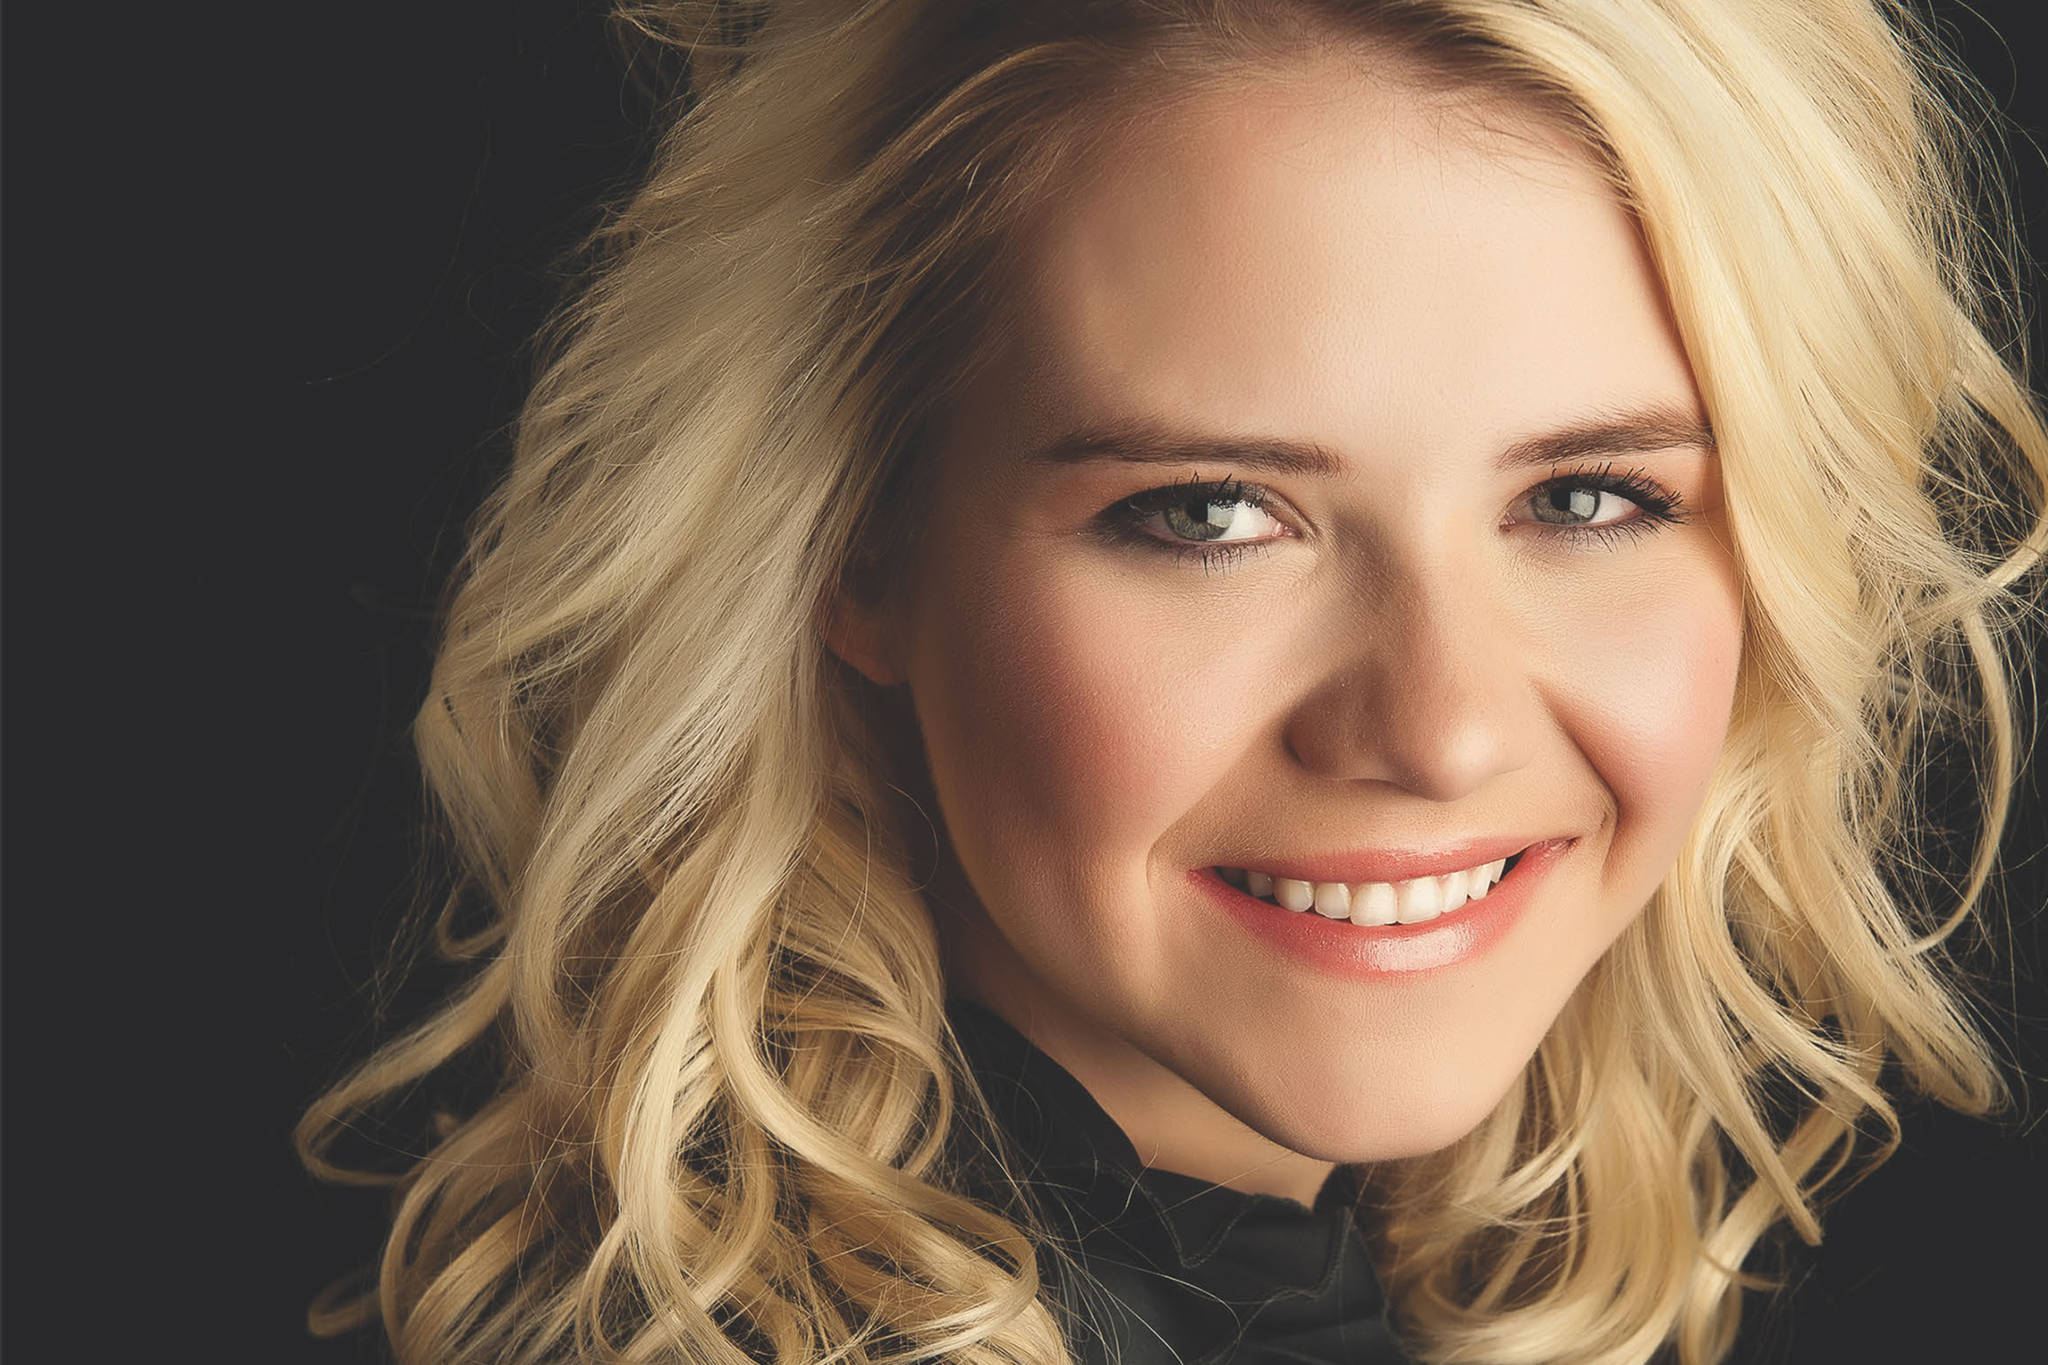 Elizabeth Smart will be the keynote speaker at the upcoming ROAR women’s conference. (Courtesy photo)